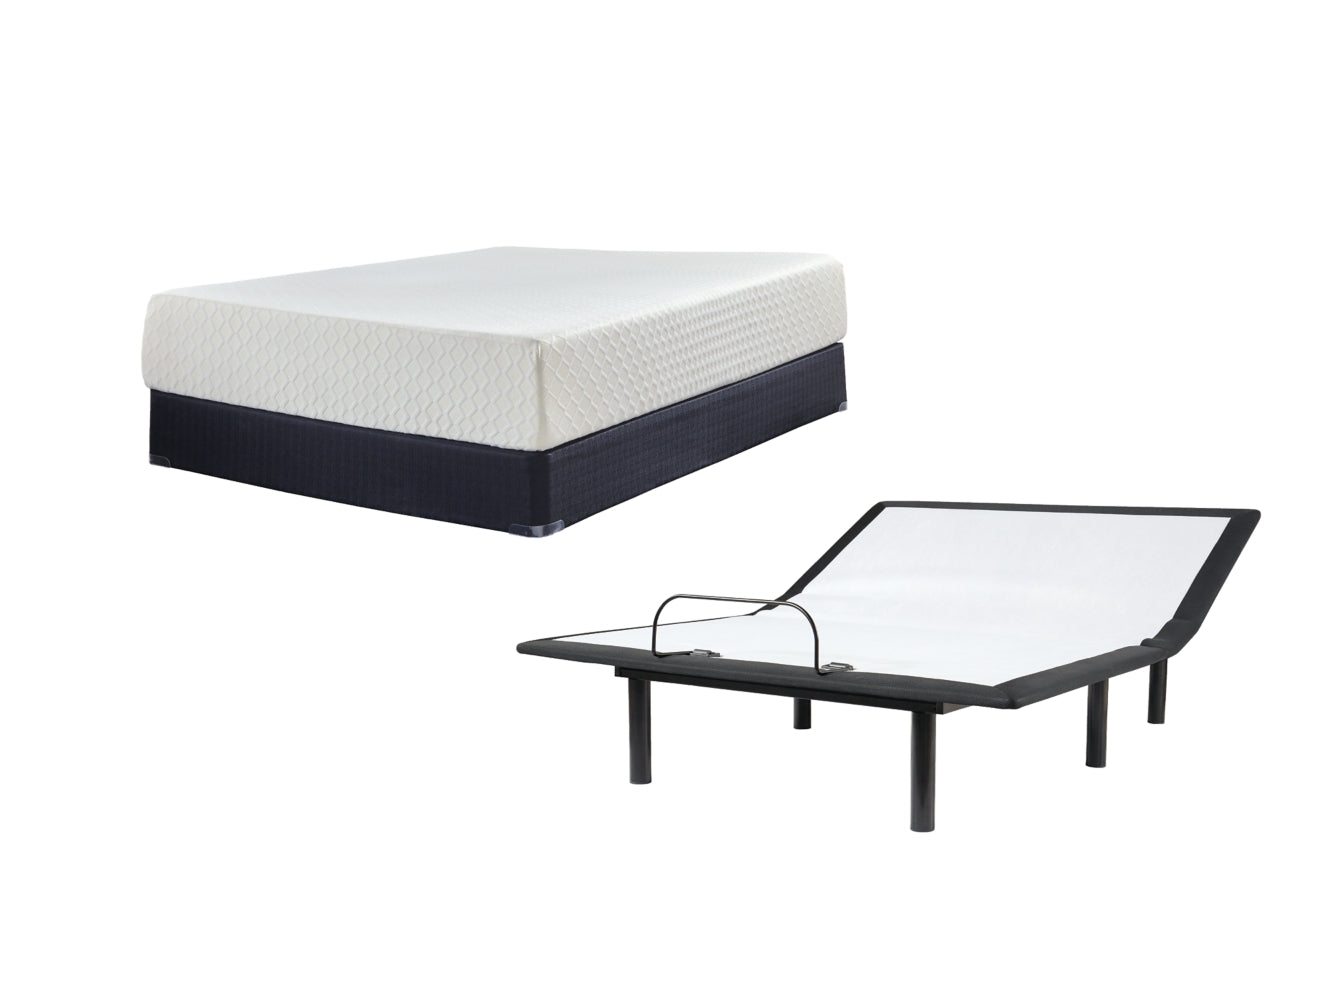 Chime 12 Inch Memory Foam Mattress with Adjustable Base - PKG010404 - furniture place usa